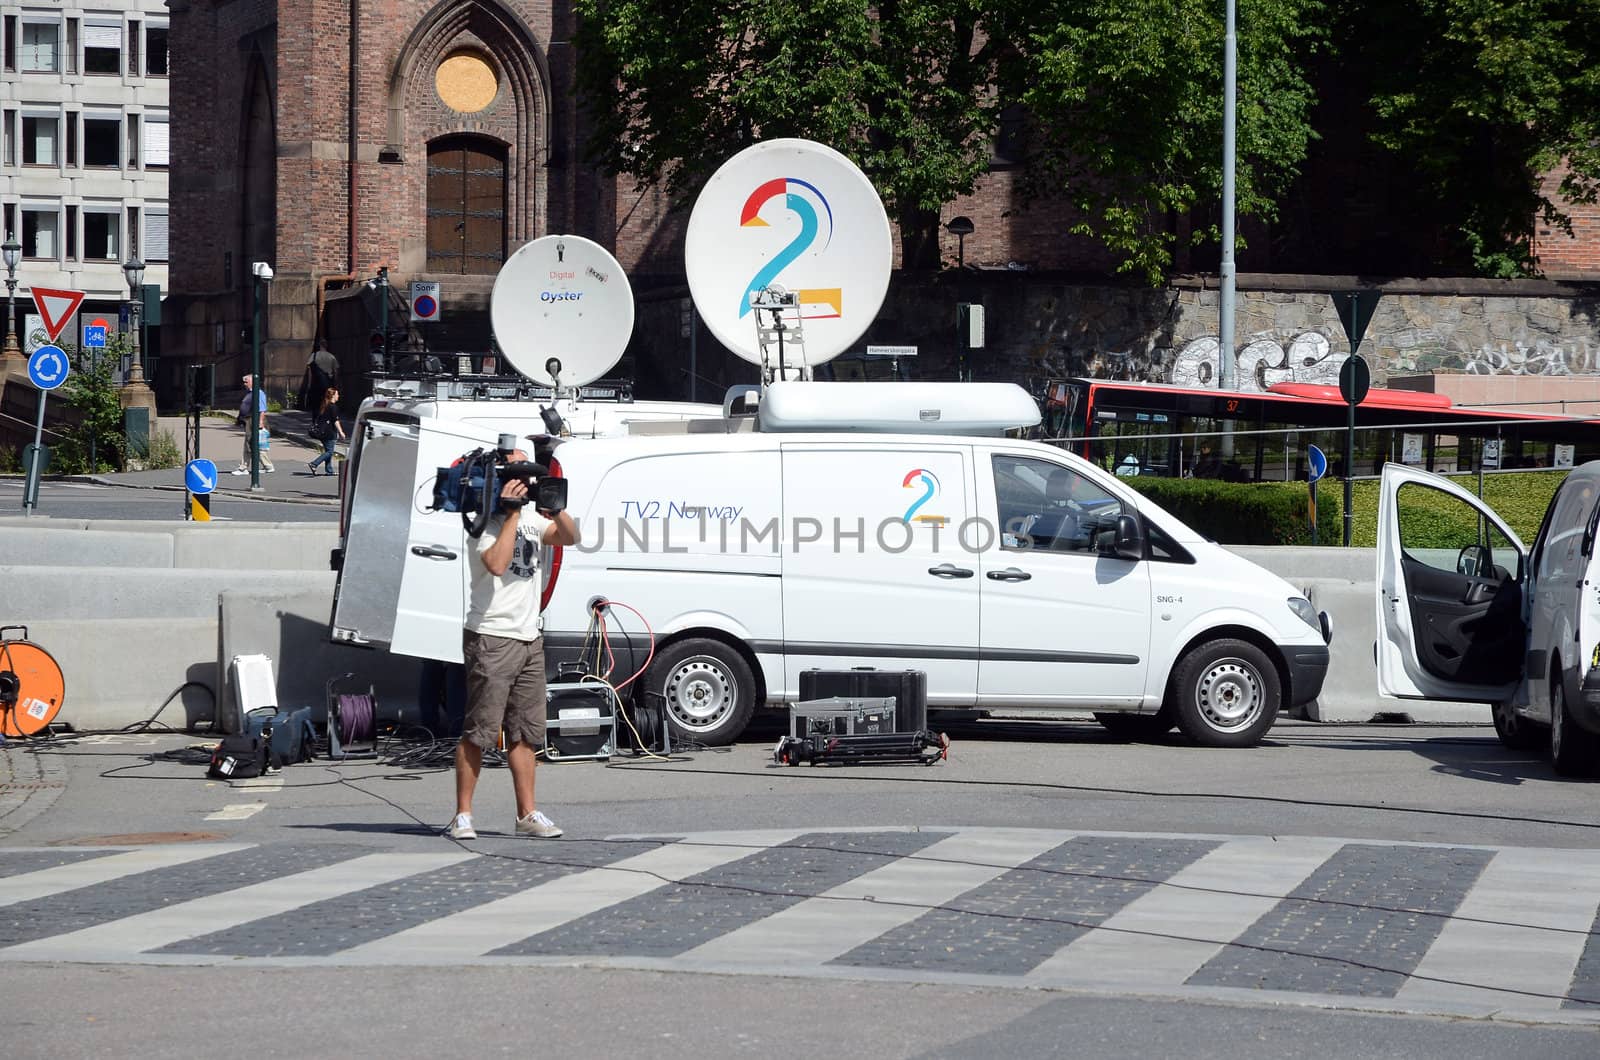 Film crew from TV 2 Norway by ljusnan69